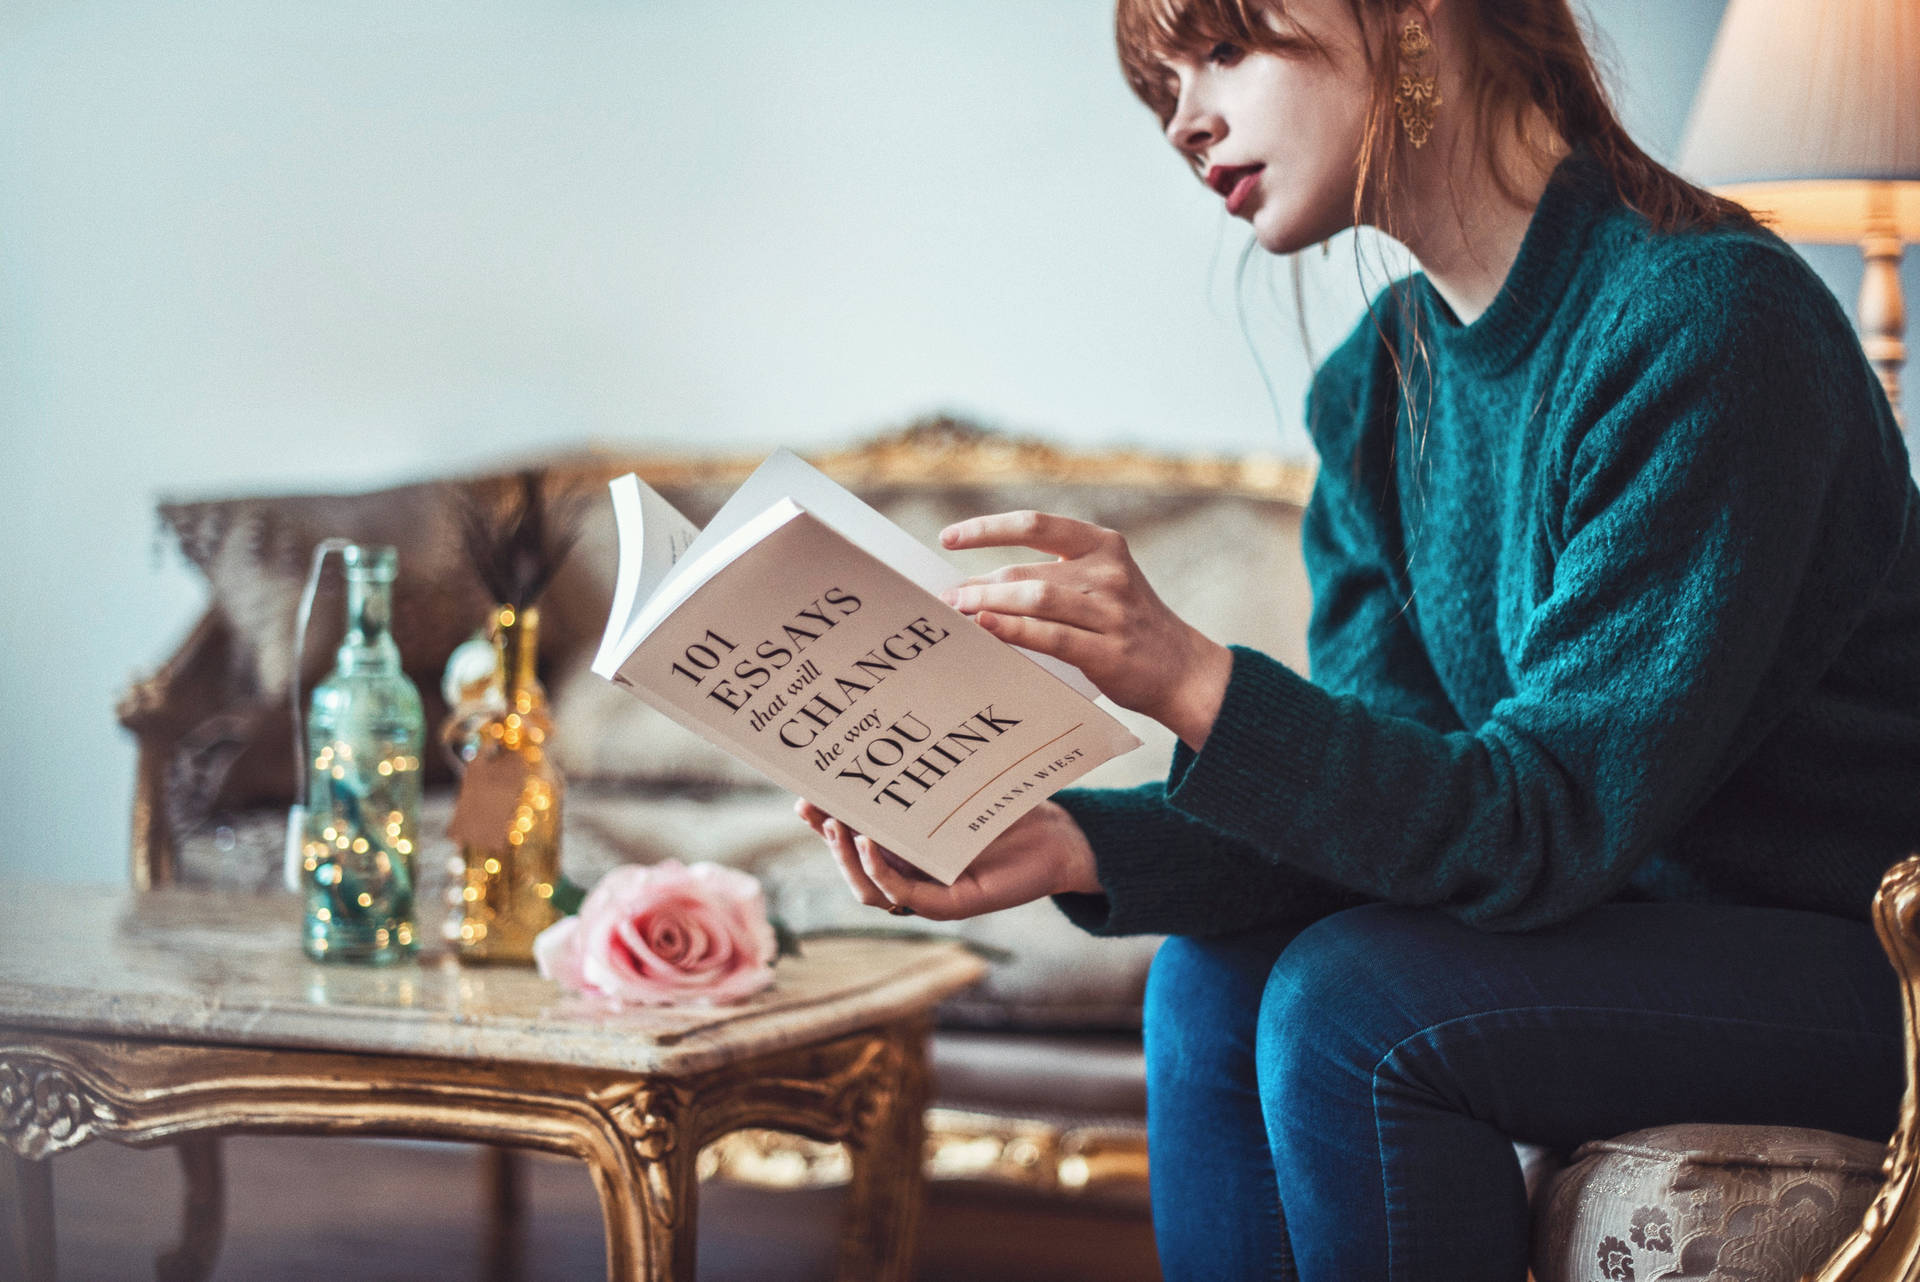 Girl Reading Book About Thinking